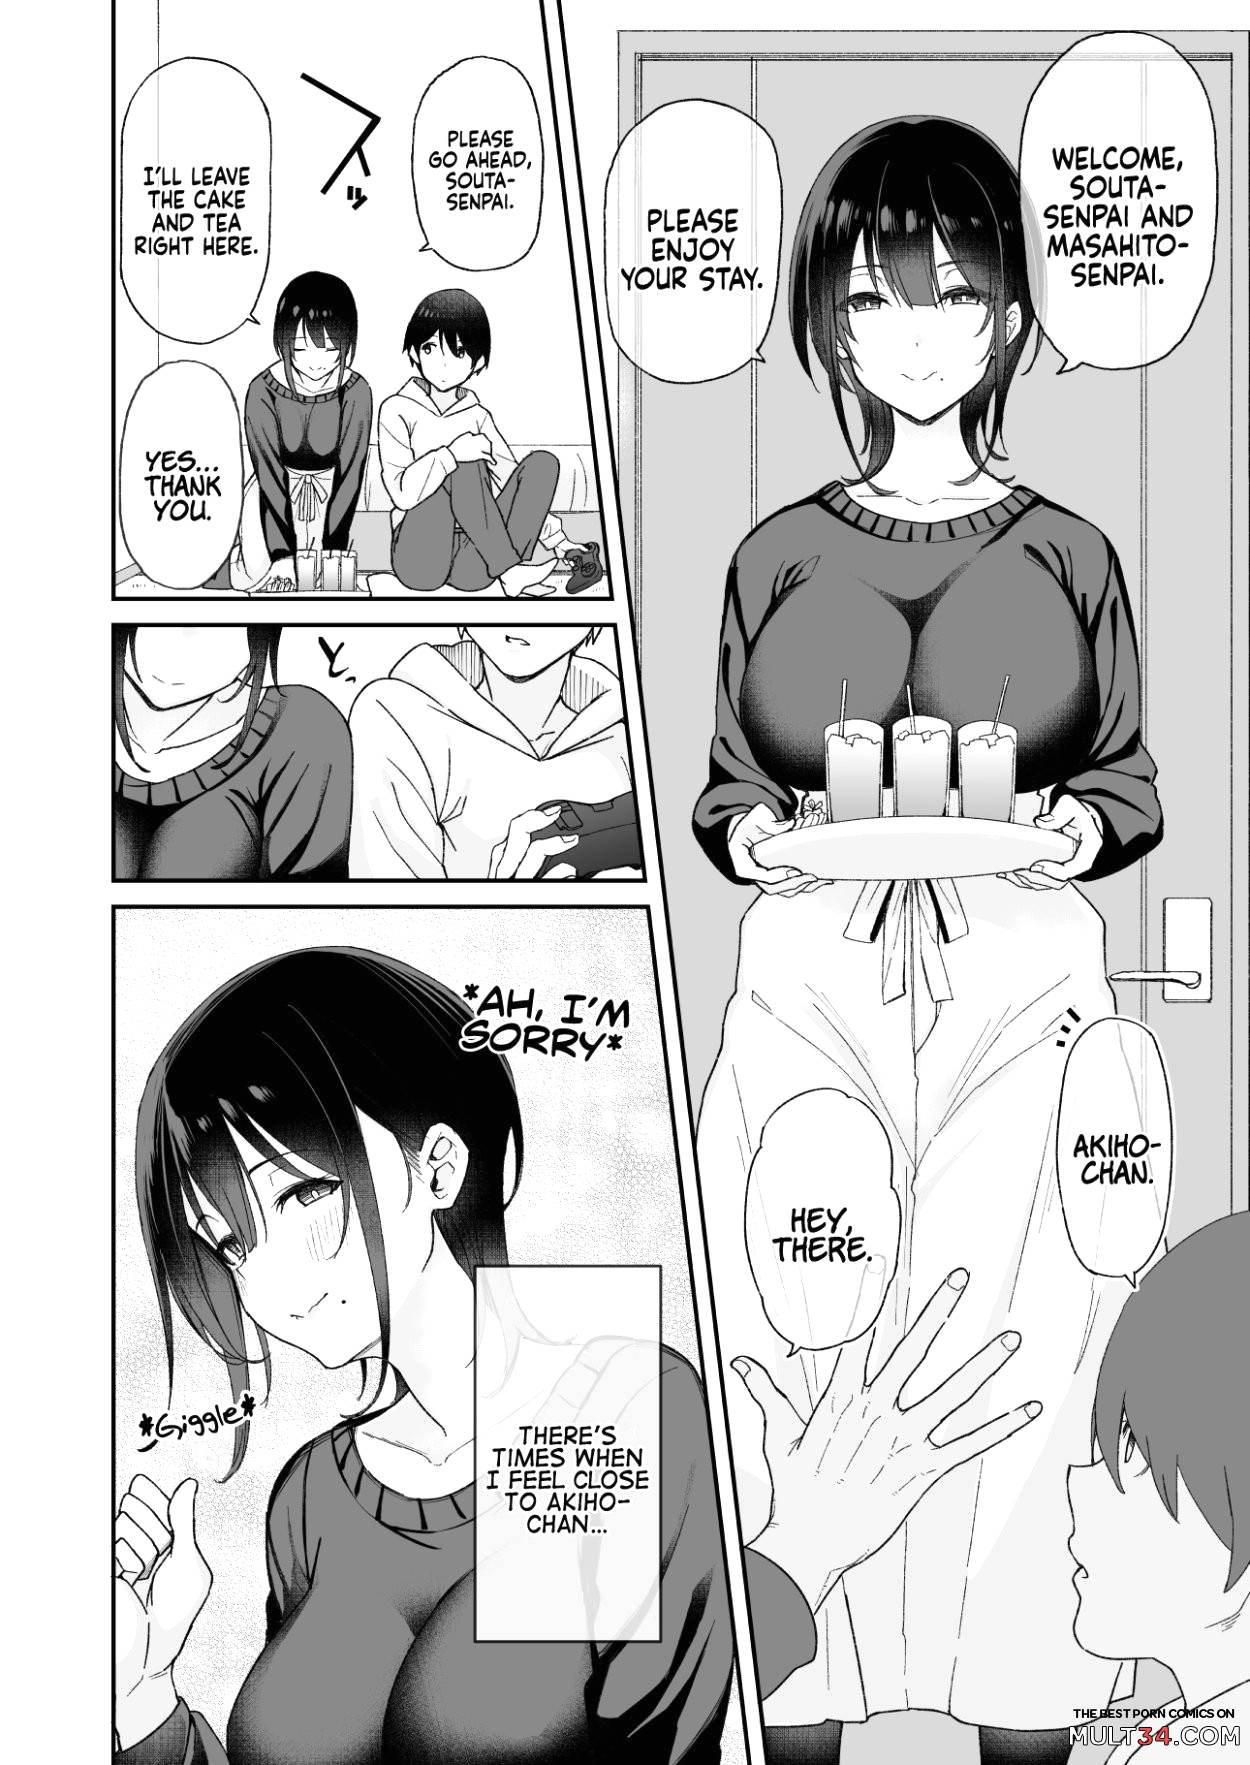 Because my Older Childhood Friend was Taken Away from Me, is it Ok for Me to Have Sex with Her Little Sister? page 5